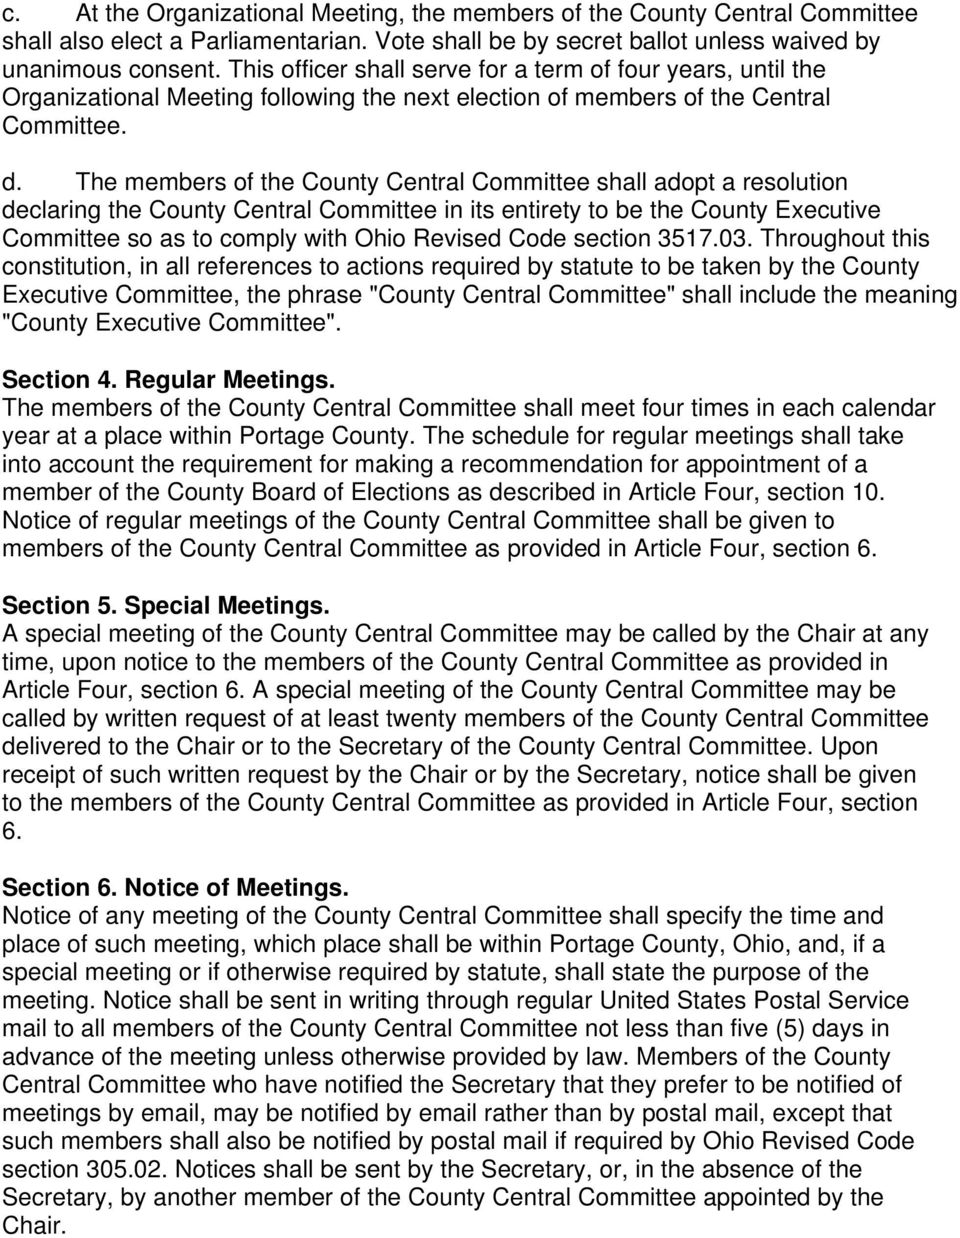 The members of the County Central Committee shall adopt a resolution declaring the County Central Committee in its entirety to be the County Executive Committee so as to comply with Ohio Revised Code